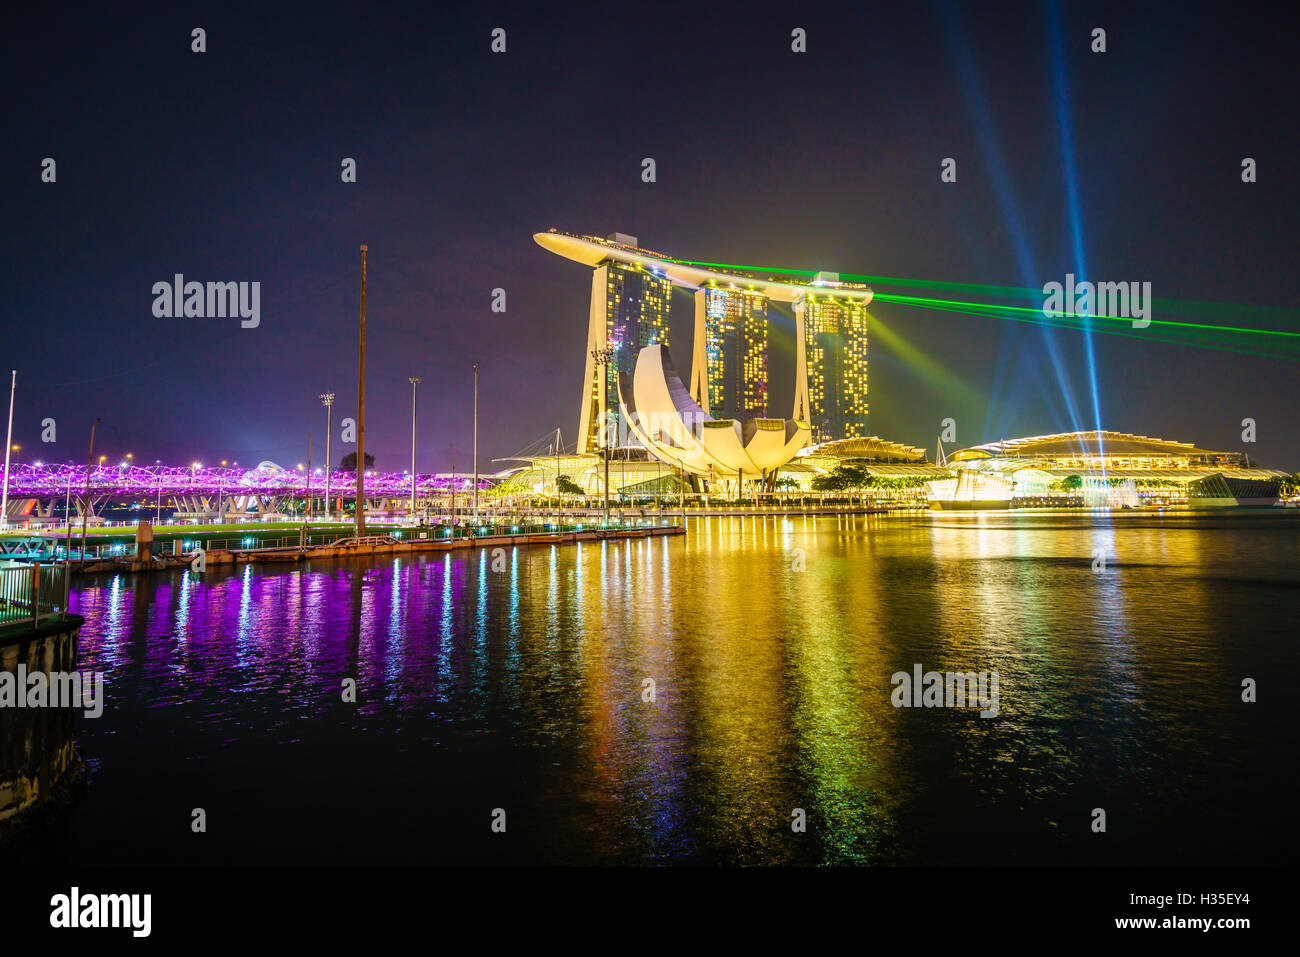 The nightly light and laser show in Marina Bay from the Marina Bay Sands, Singapore Stock Photo